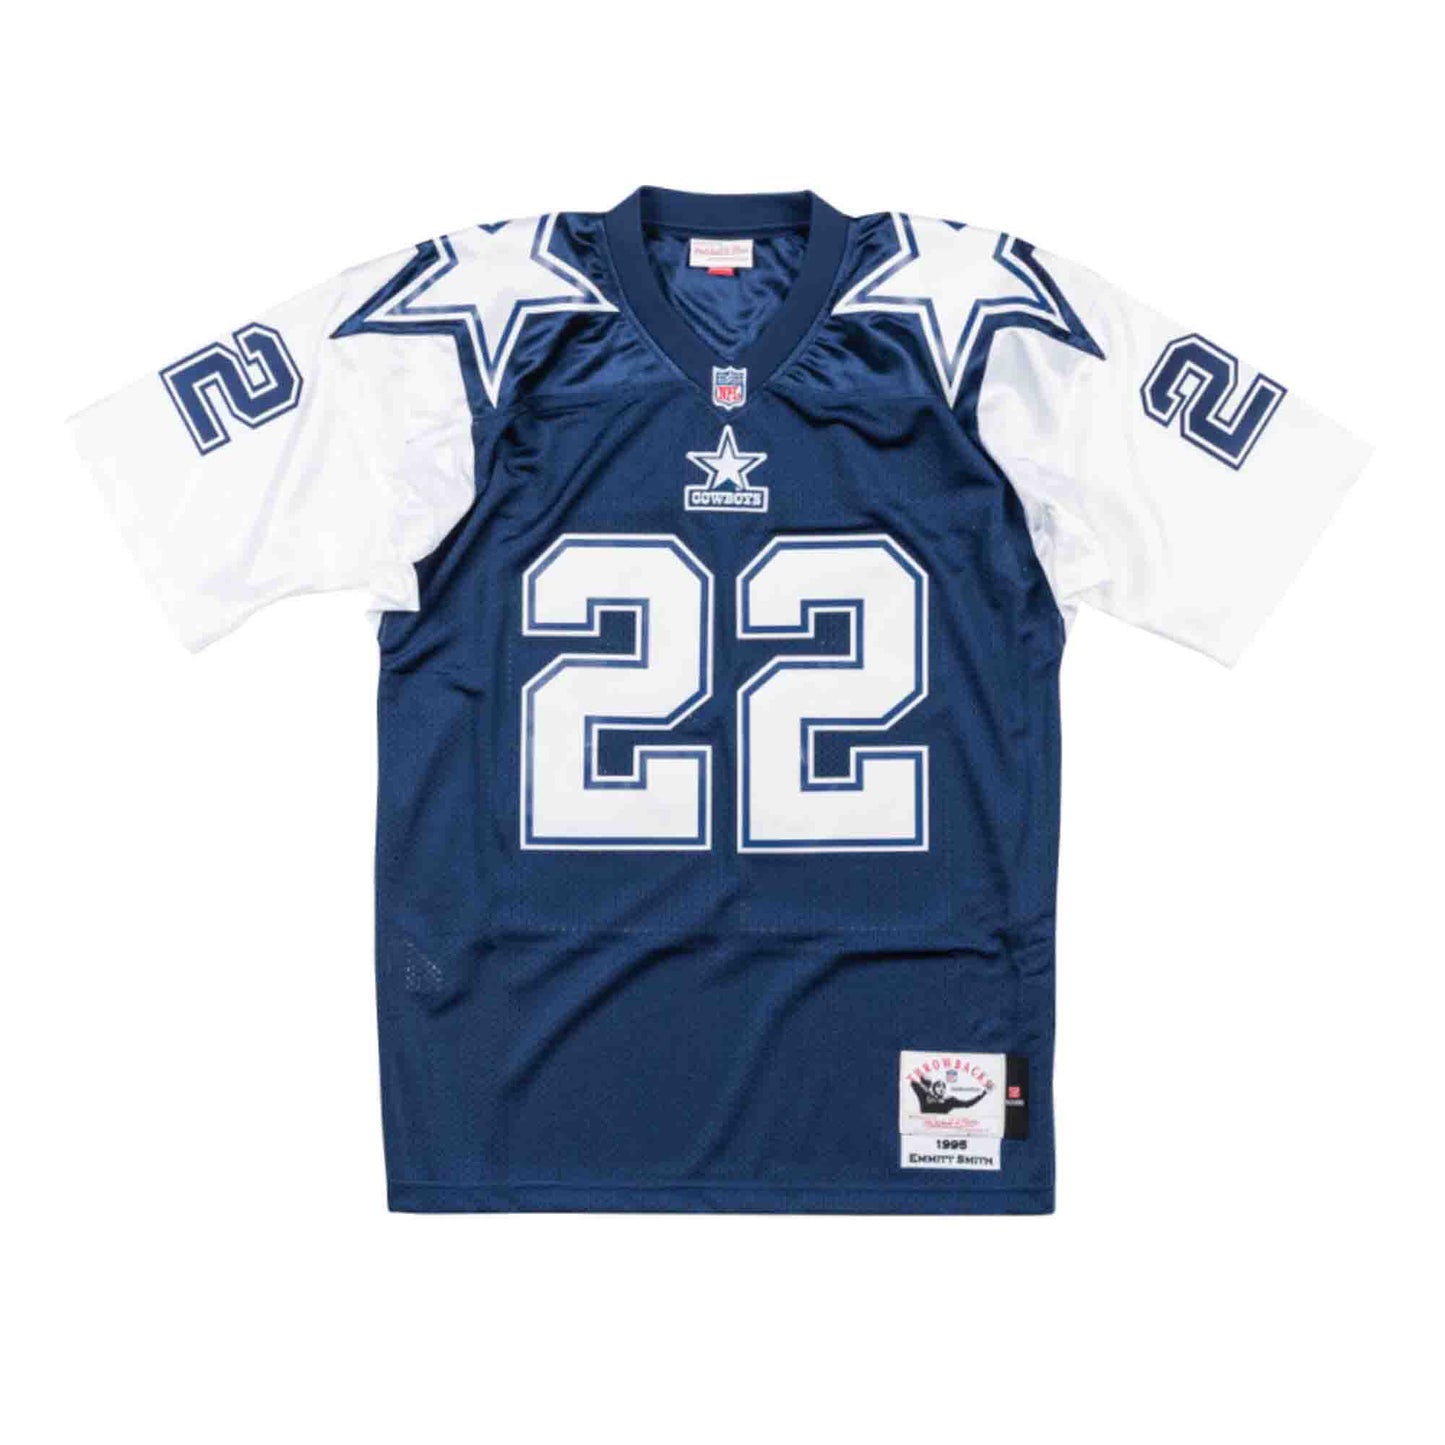 NFL Authentic Jersey Dallas Cowboys Emmit Smith #22